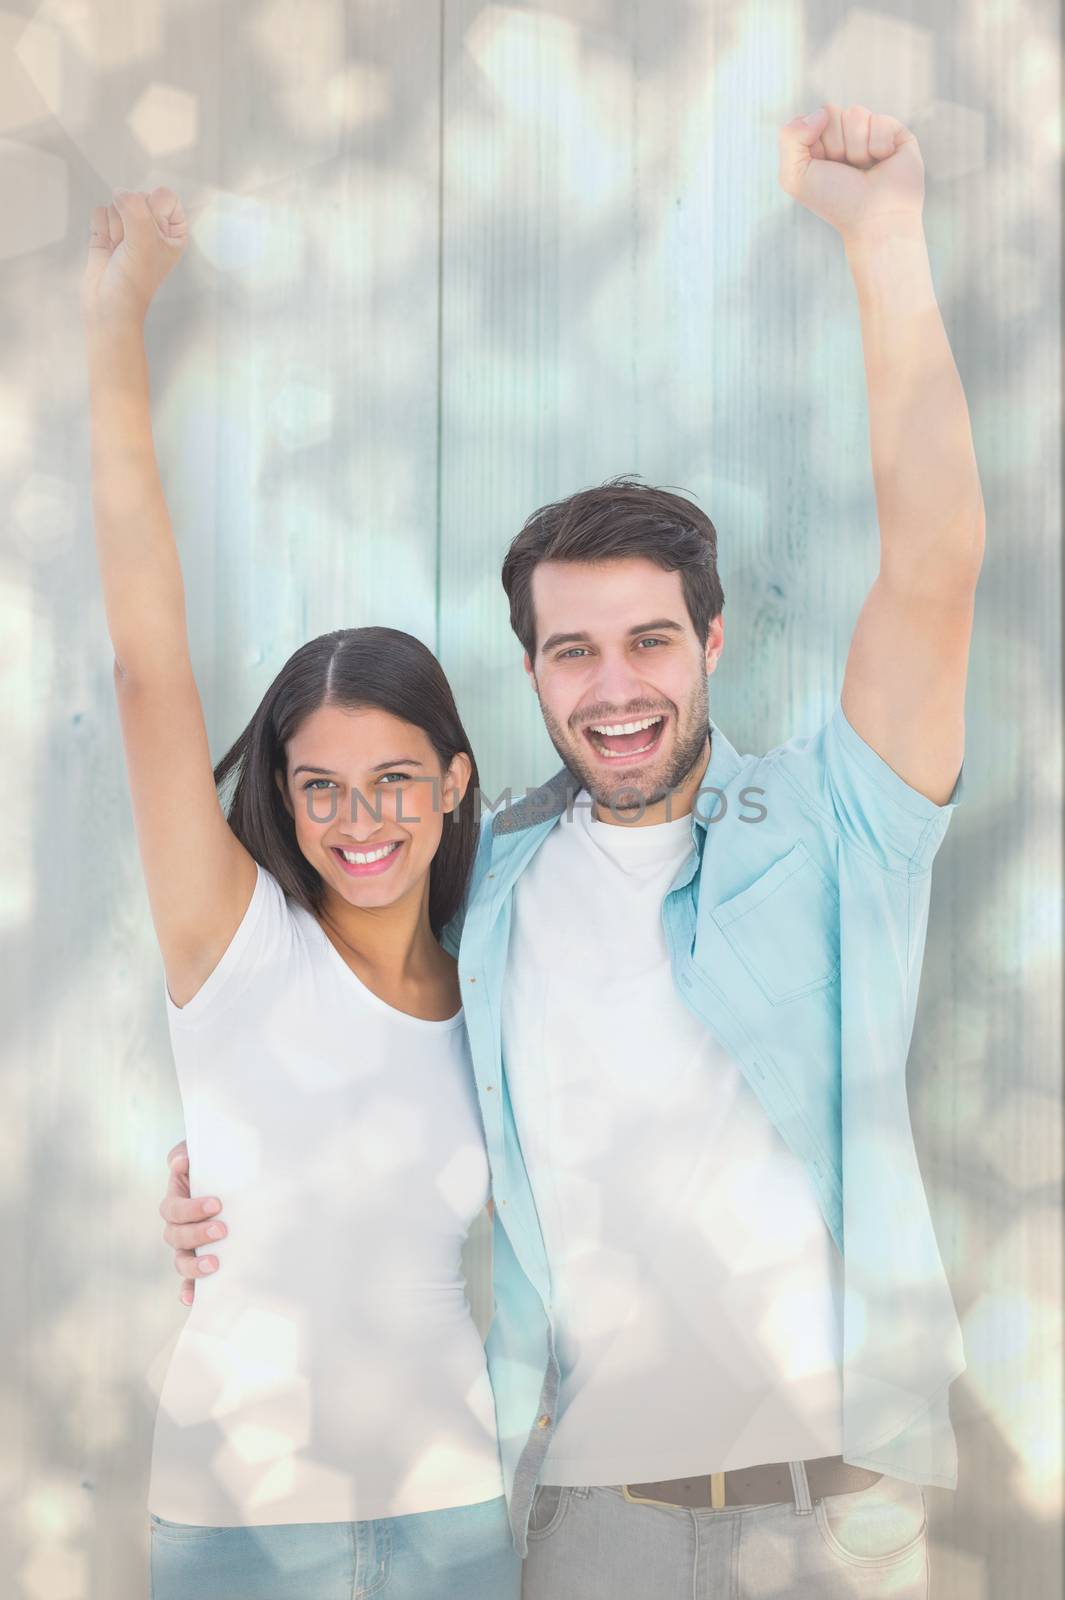 Happy casual couple cheering together against light glowing dots design pattern